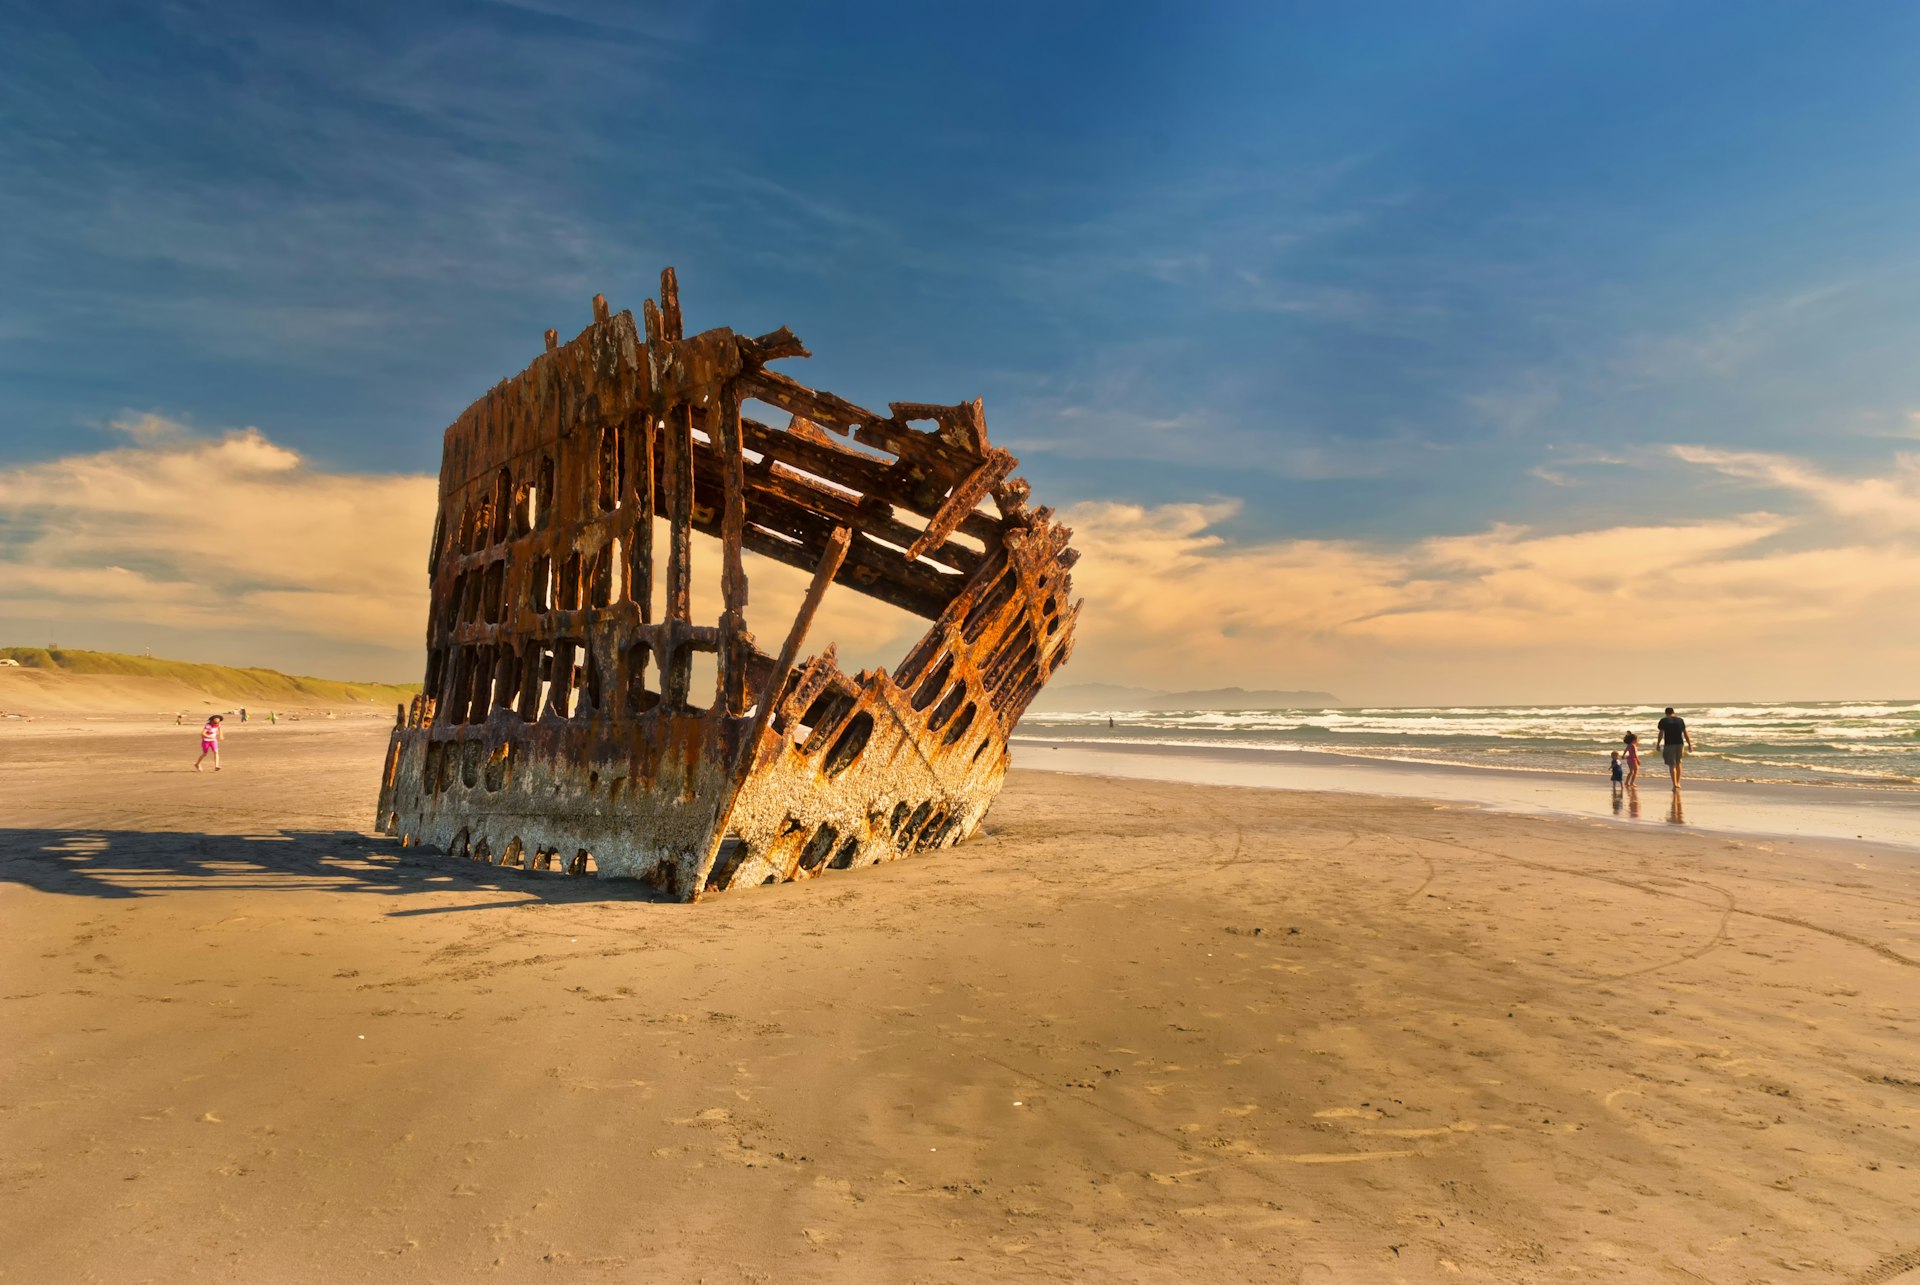 Hull of the shipwreck of the Peter Iredale on the Oregon coast.